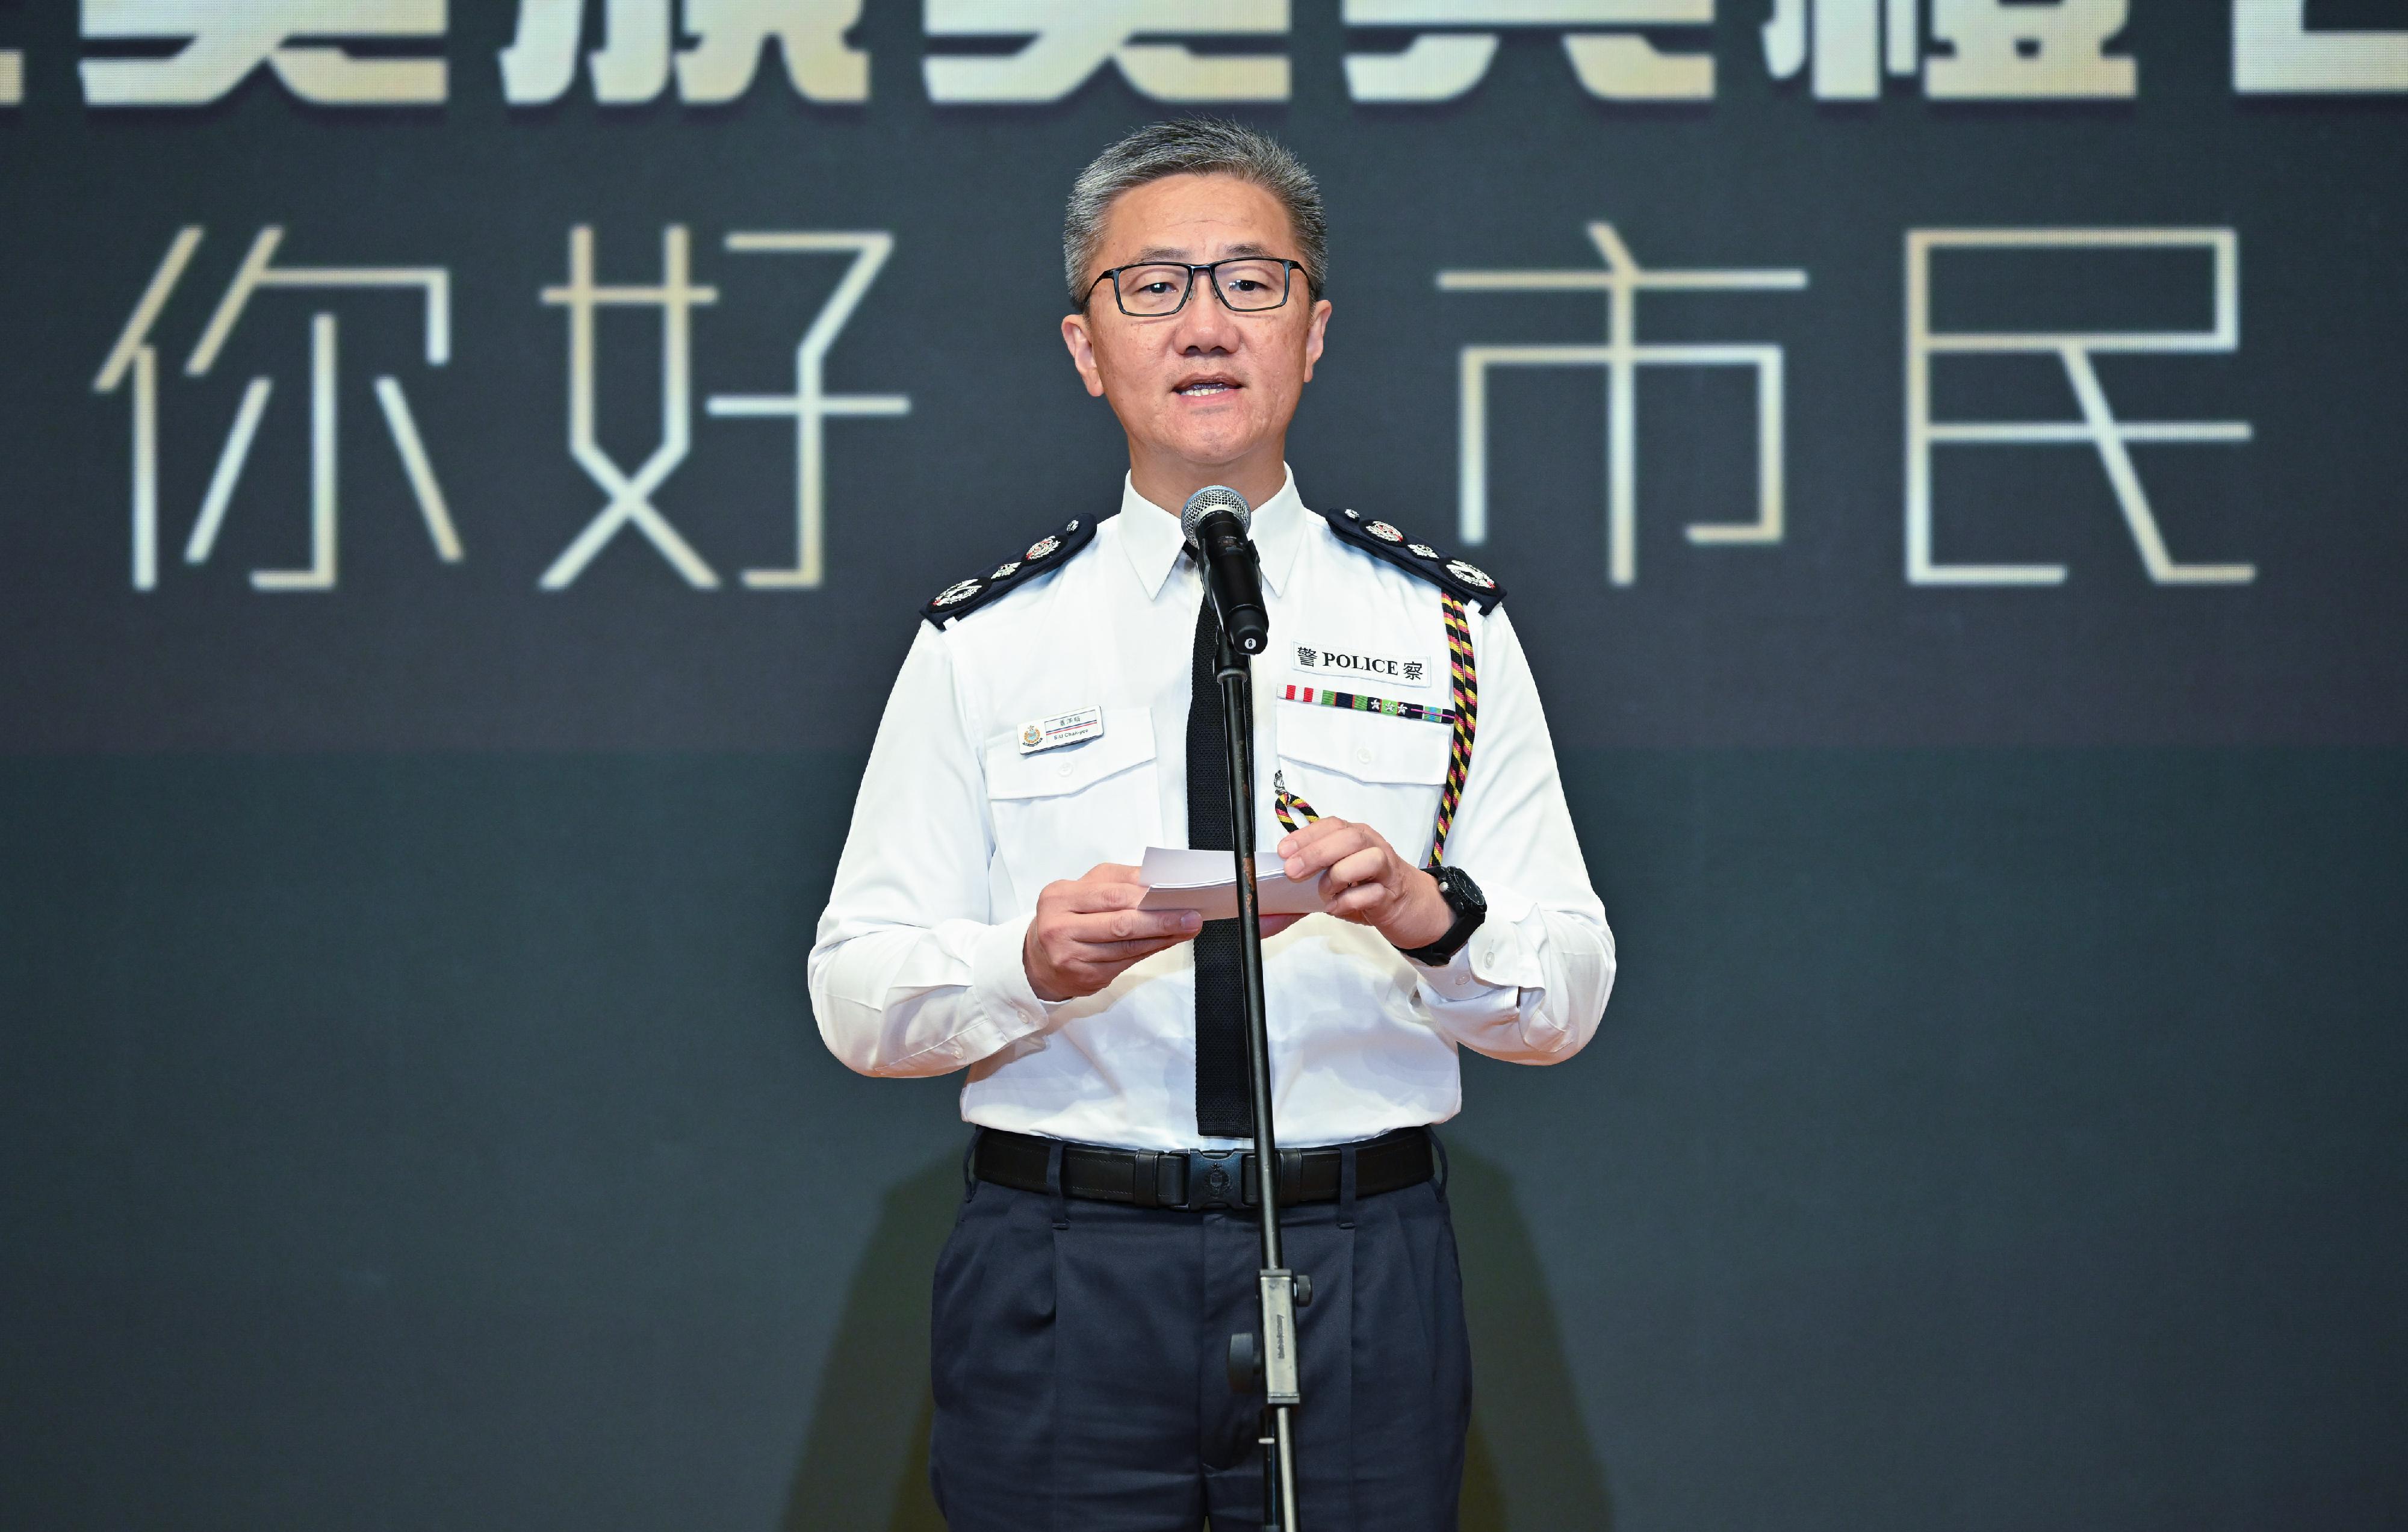 The Good Citizen Award Presentation Ceremony 2023 was held today (March 17). Picture shows the Commissioner of Police, Mr Siu Chak-yee, addressing at the ceremony.